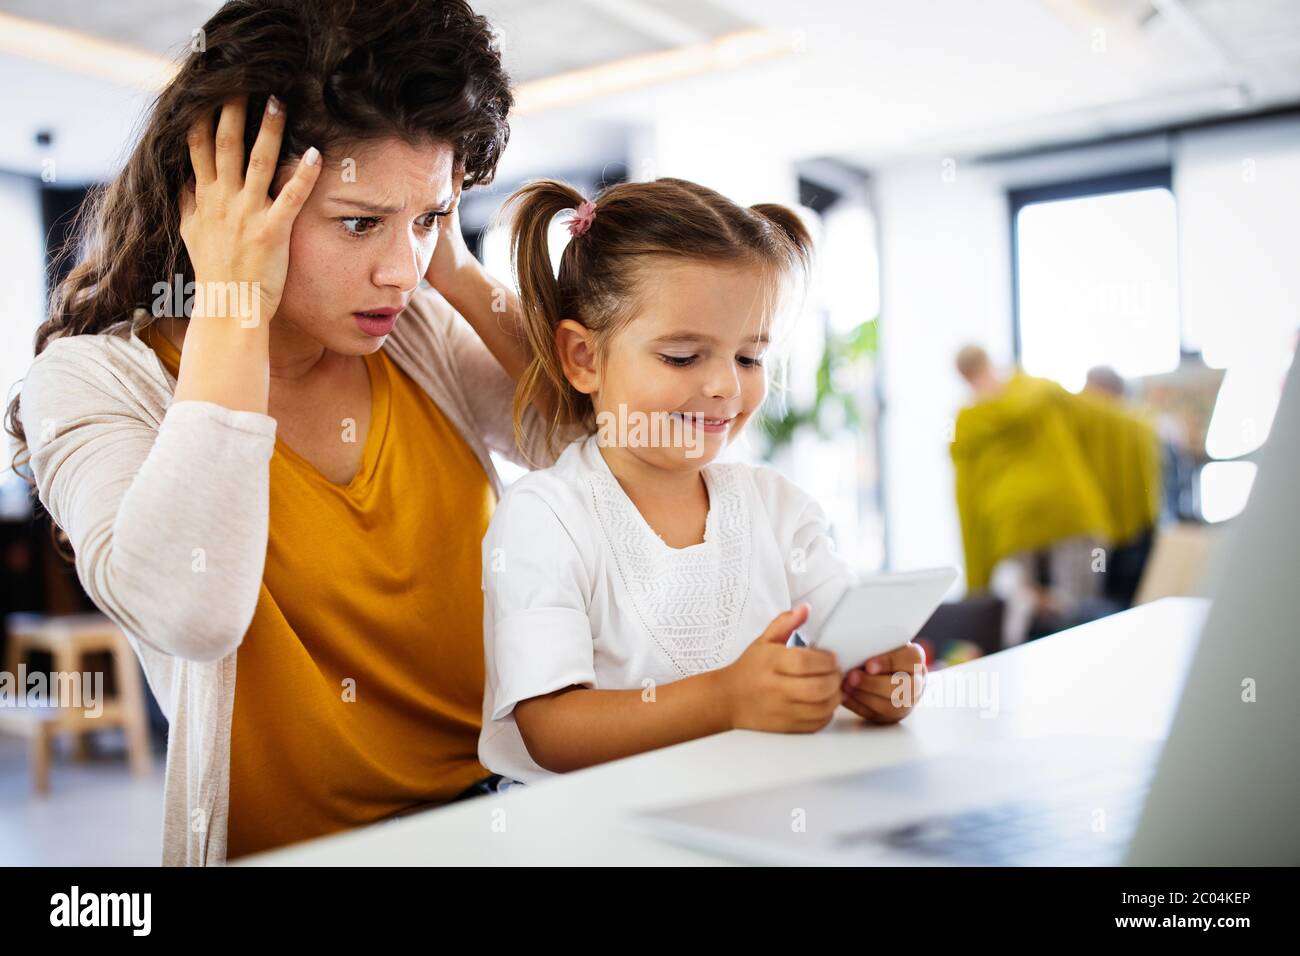 People, children, technology and addiction concept. Little girl with smartphones Stock Photo